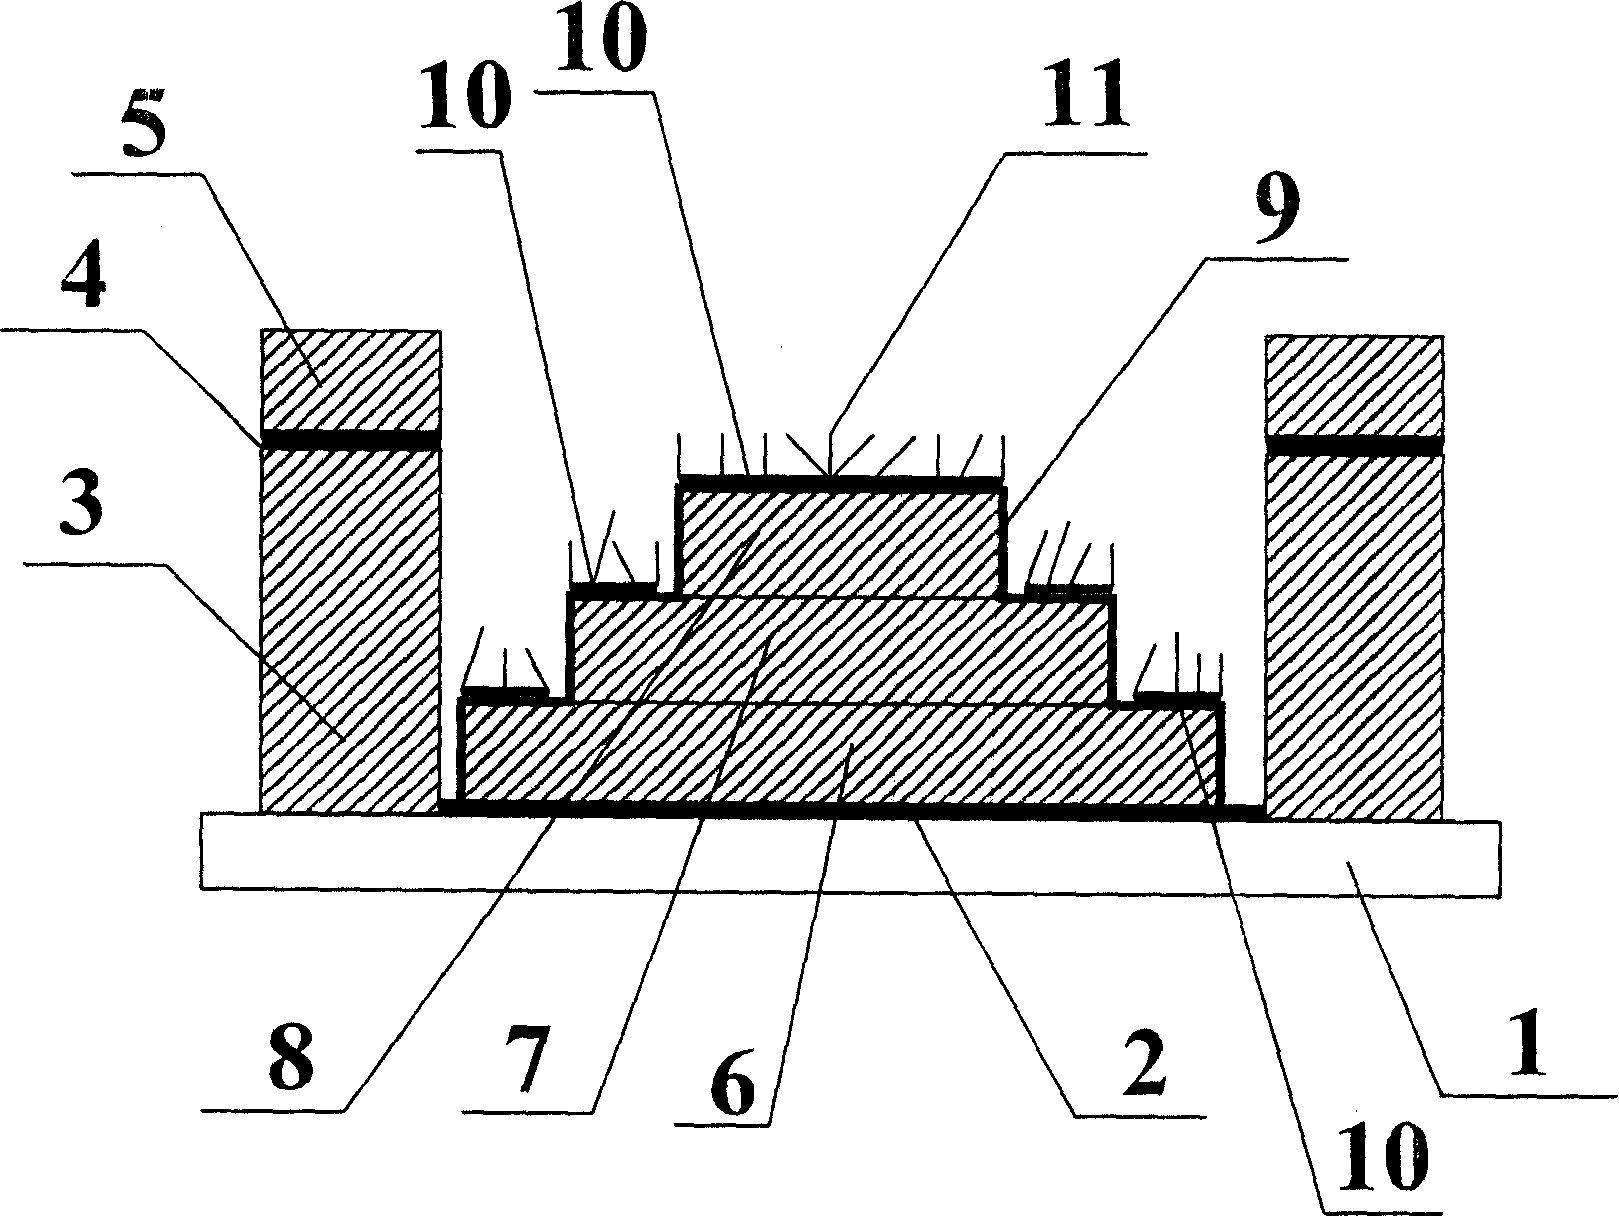 Coaxial multi-loop column type cathode array structural panel display device and its production technique